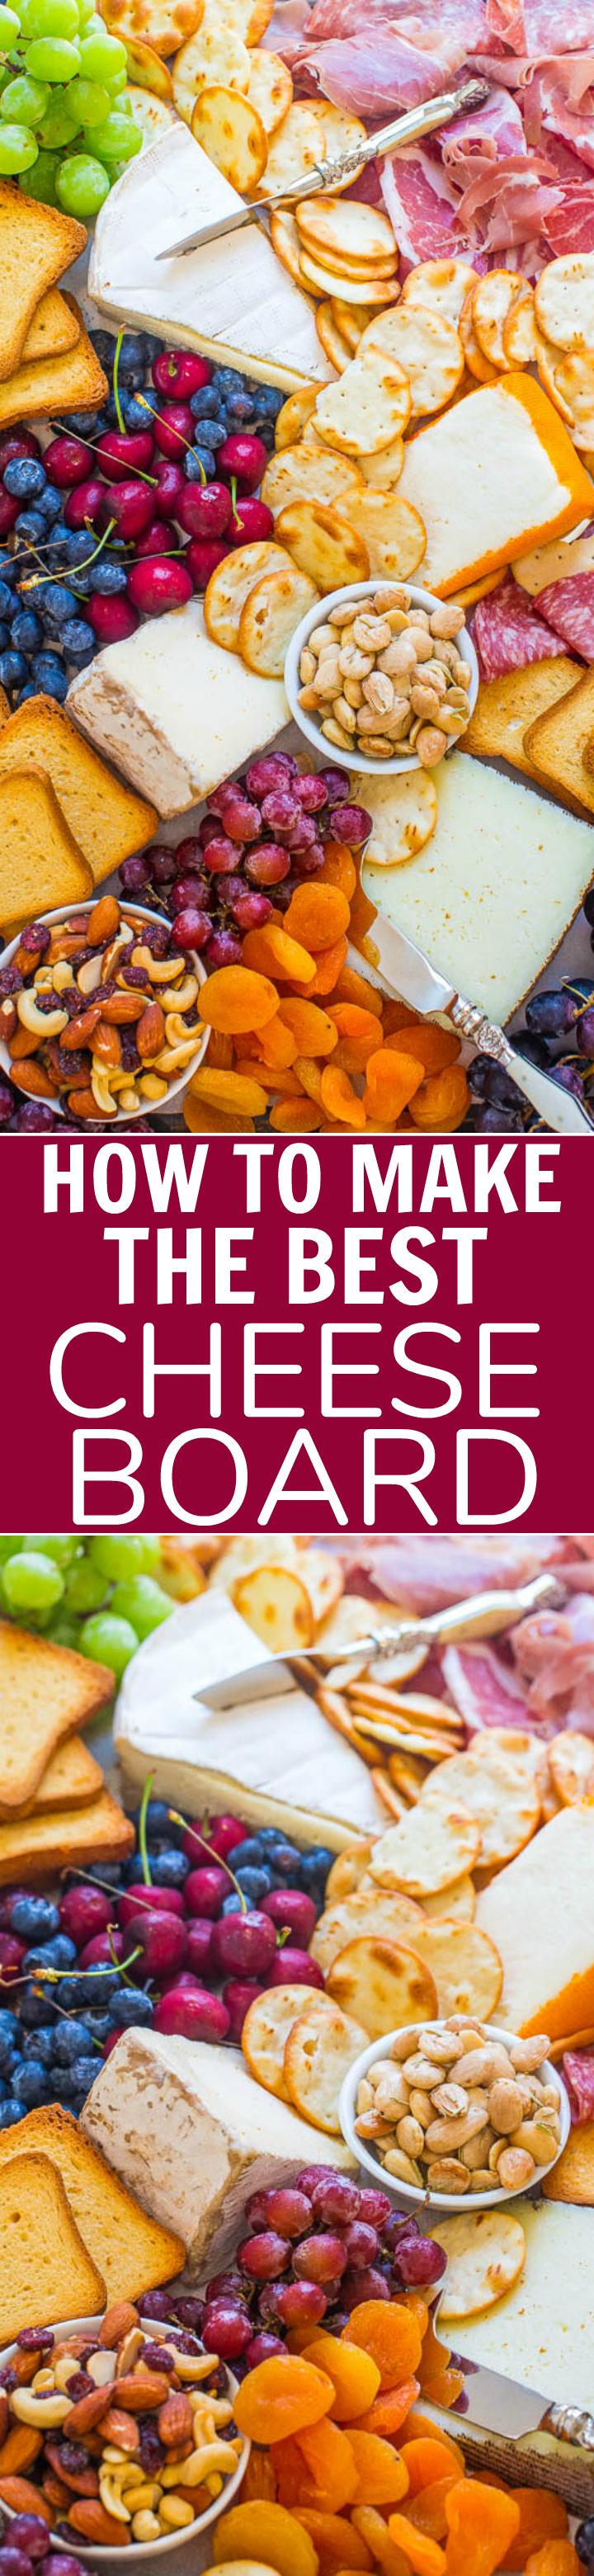 How to Make the Best Meat and Cheese Board — Learn my TIPS and tricks to create the BEST meat and cheese board!! From brie to prosciutto and everything in between, this board has it ALL! It'll be a major hit at your next party!!